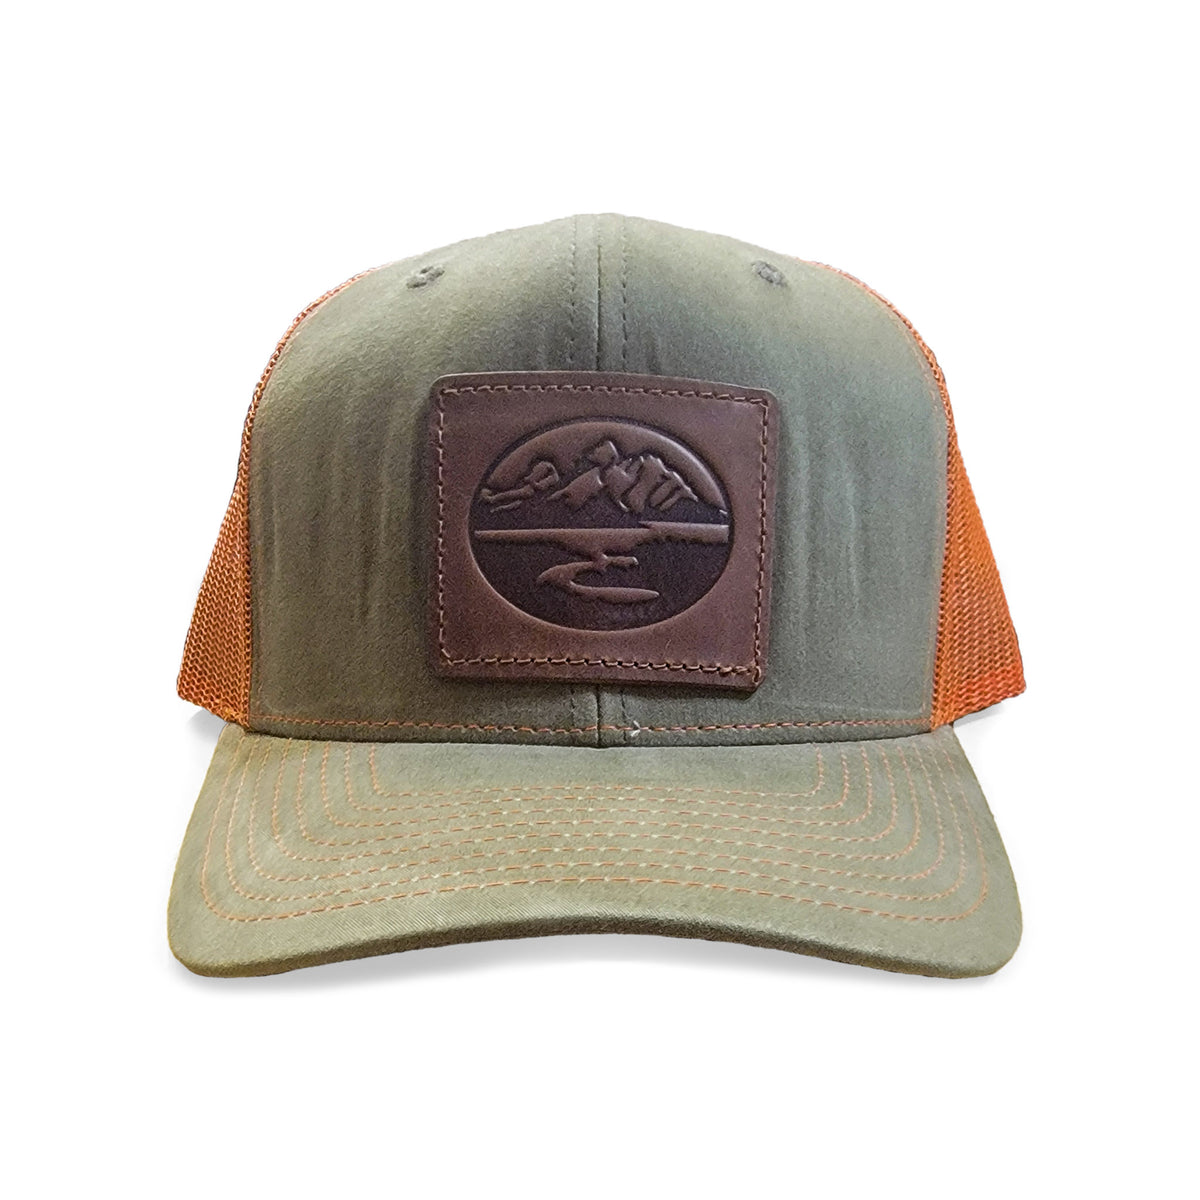 Madison Creek Outfitters Leather Patch Trucker Hat – Limited Edition